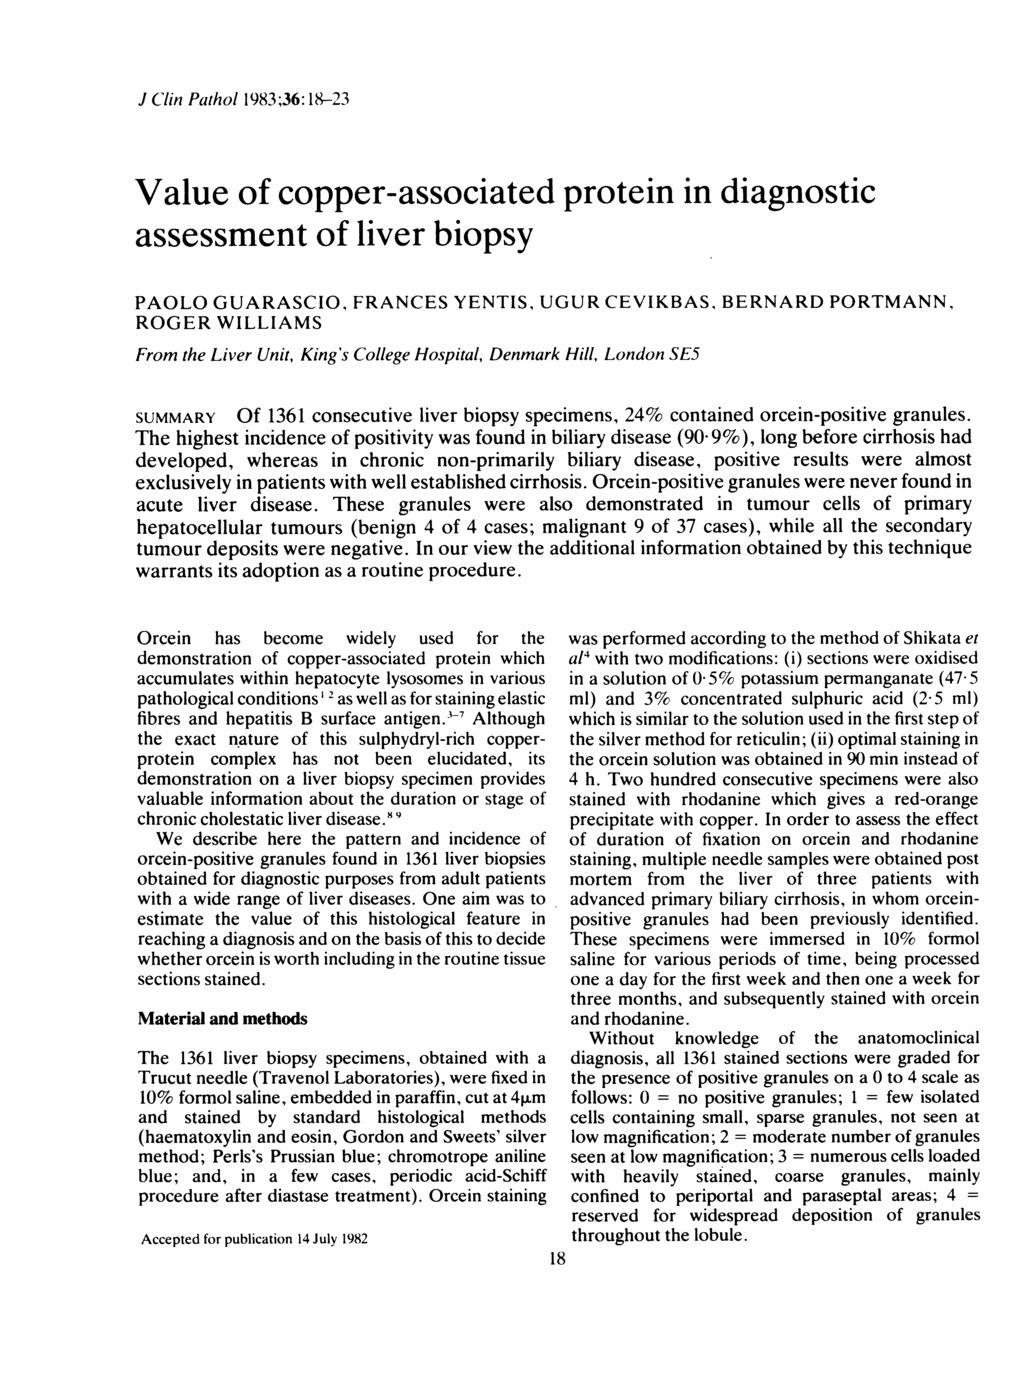 J Clin Pathol 1983;36: 18-23 Value of copper-associated protein in diagnostic assessment of liver biopsy PAOLO GUARASCIO, FRANCES YENTIS, UGUR CEVIKBAS, BERNARD PORTMANN, ROGER WILLIAMS From the